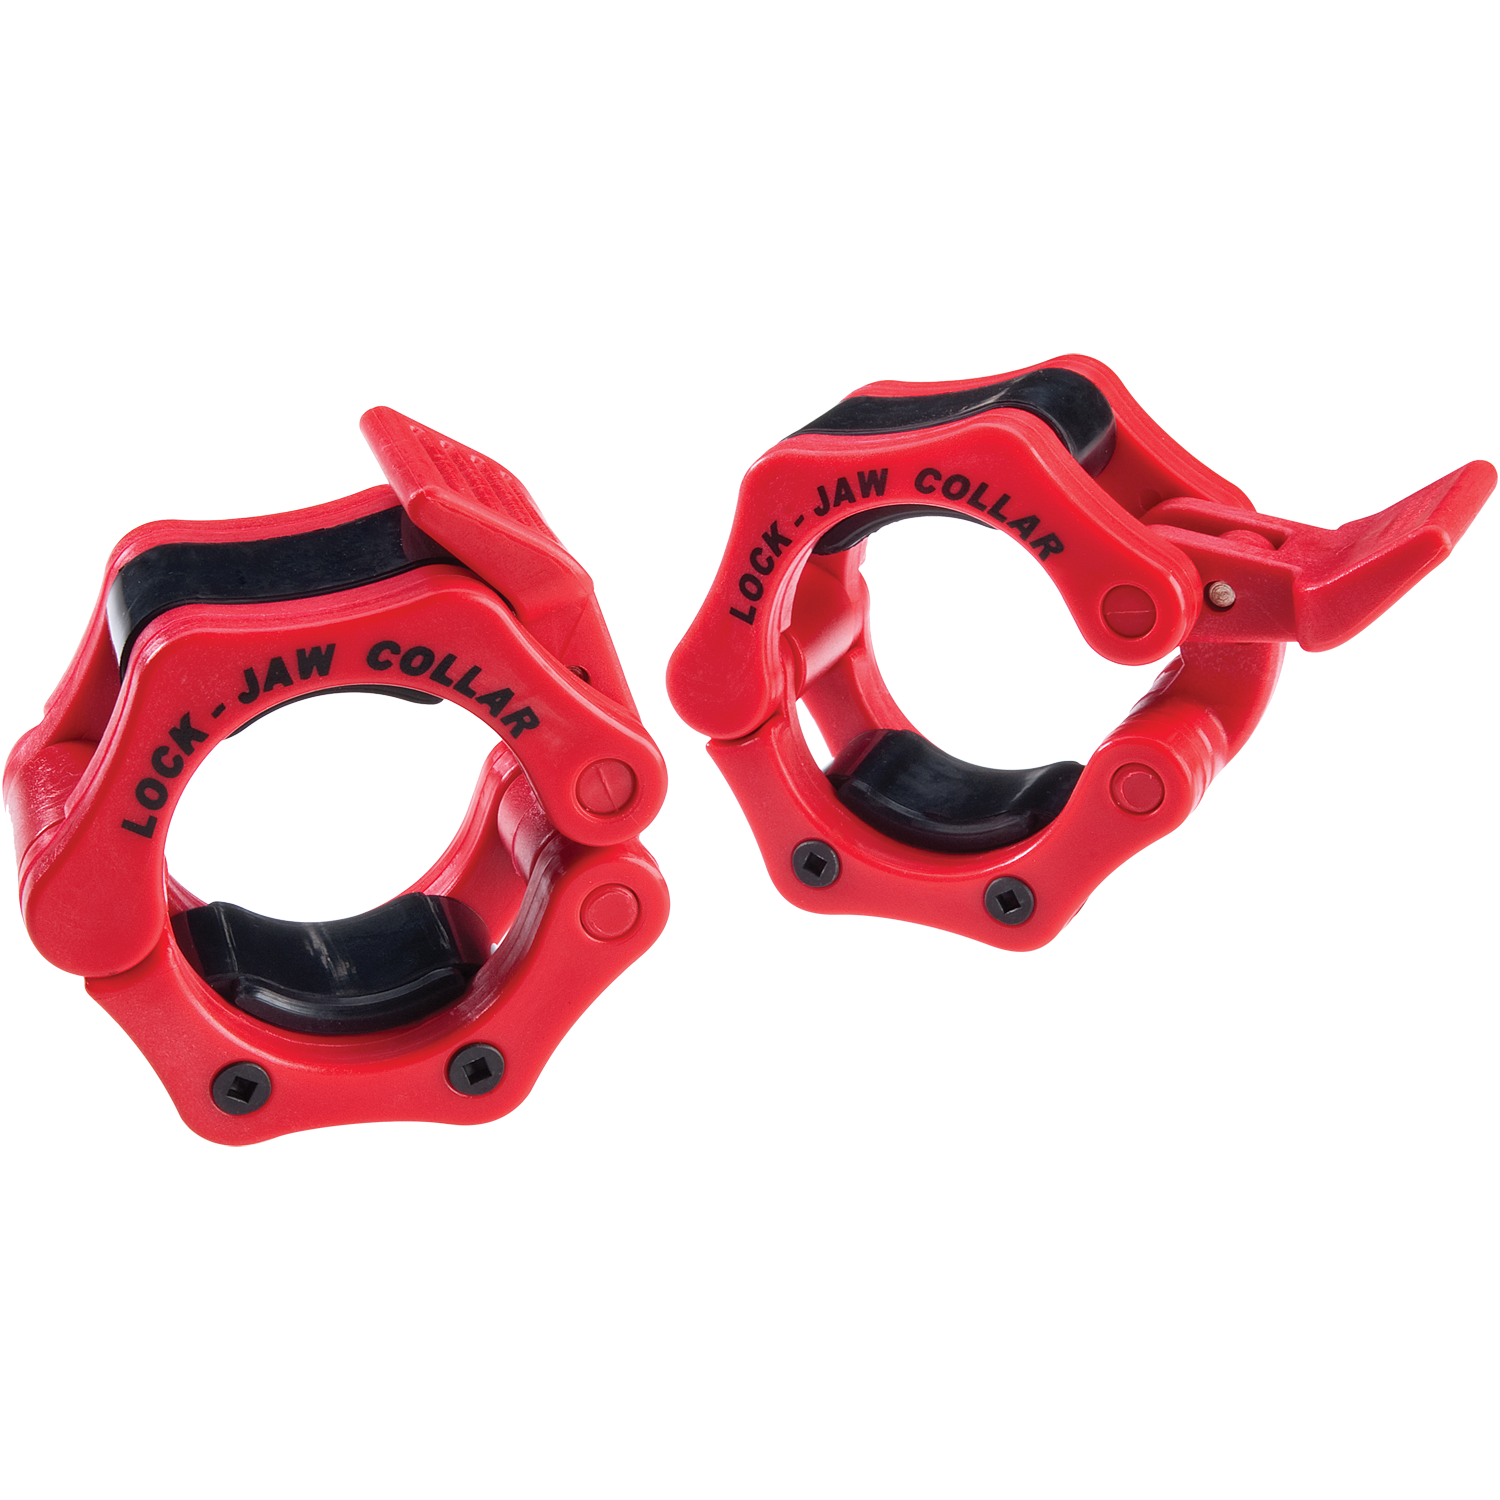 Body-Solid Lock-Jaw Collars - - Rood